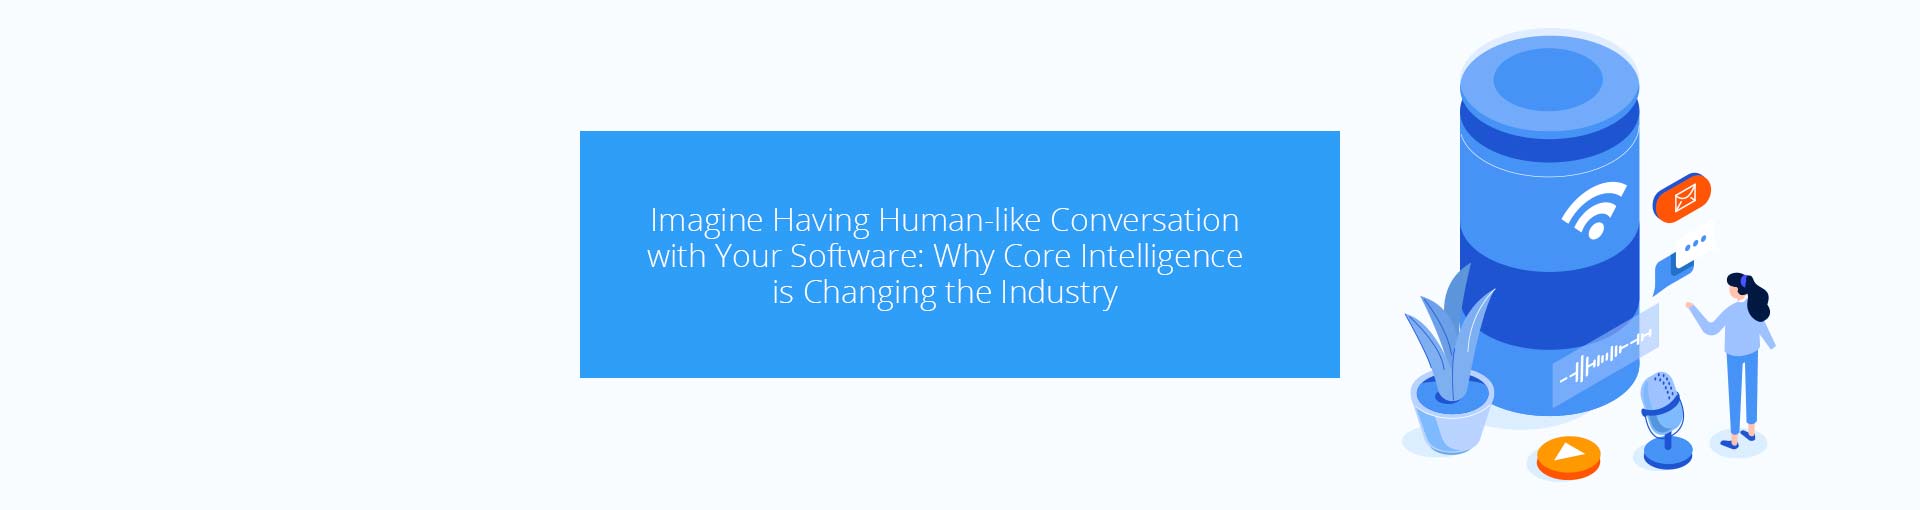 Imagine Having Human-Like Conversations with Your Software: Why Core Intelligence is Changing the Industry